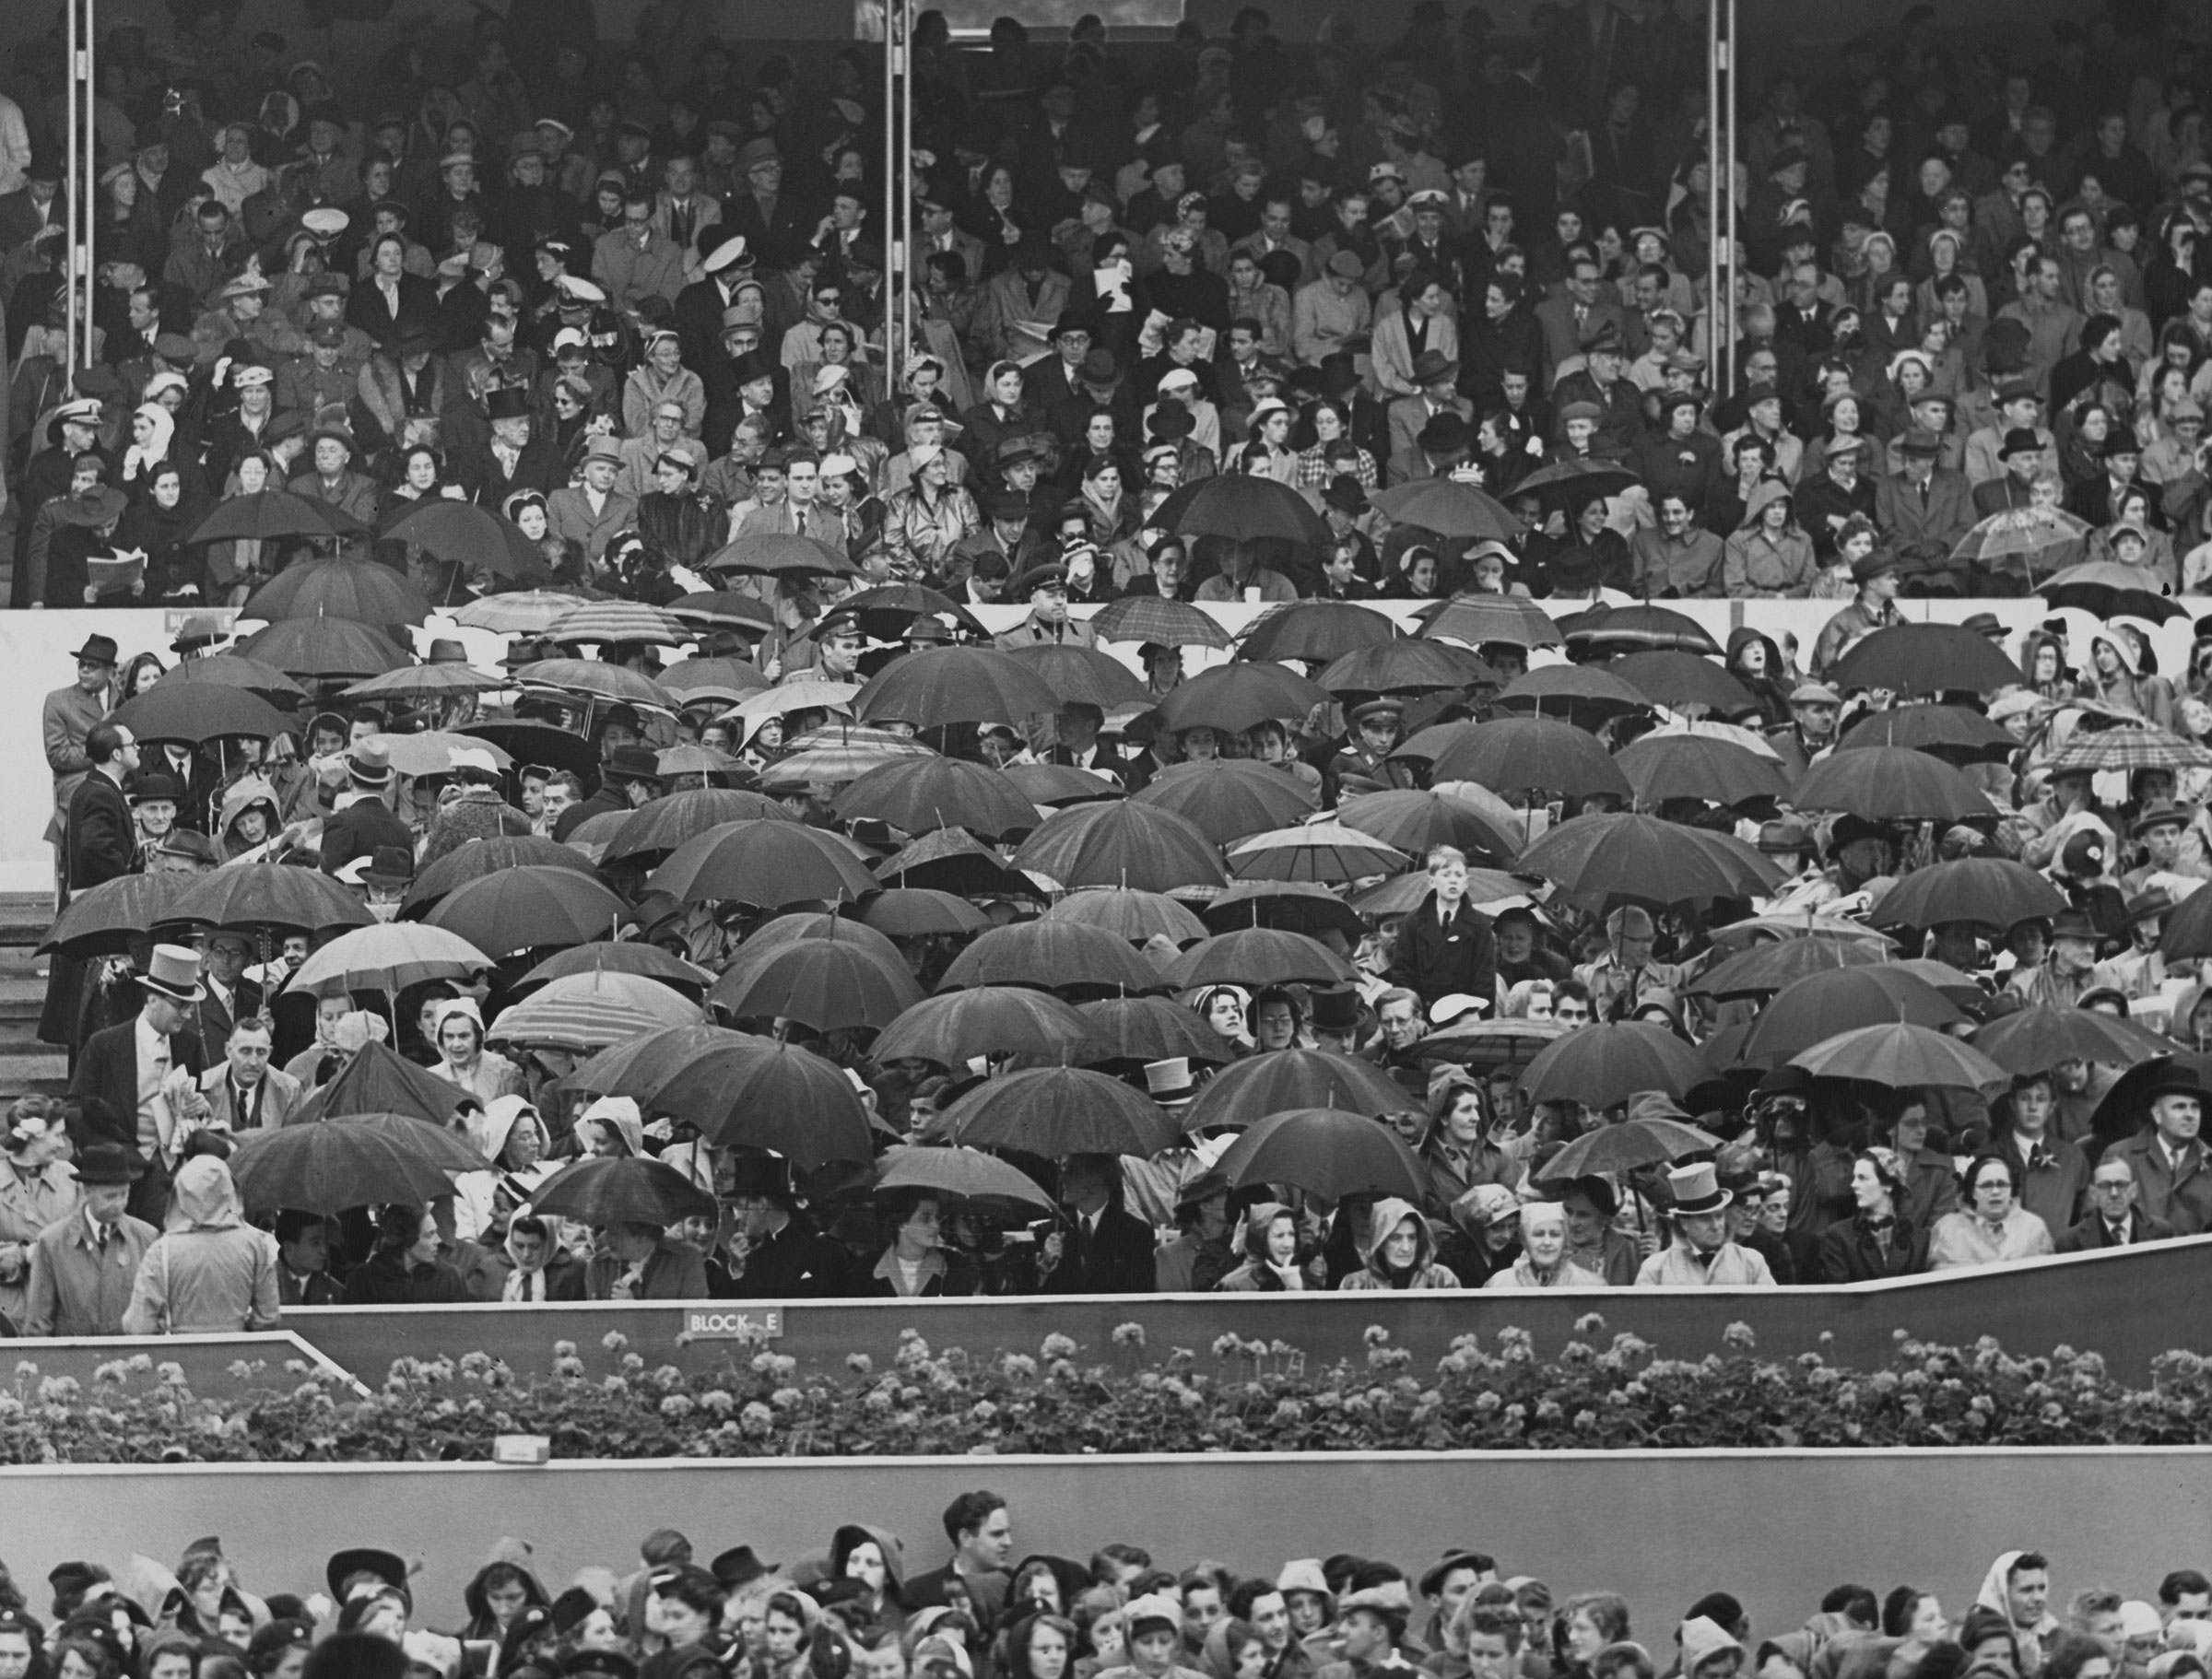 Spectators, some sheltering beneath umbrellas, watching the Coronation procession of Elizabeth II. (Fox Photos/Hulton Archive/Getty Images)